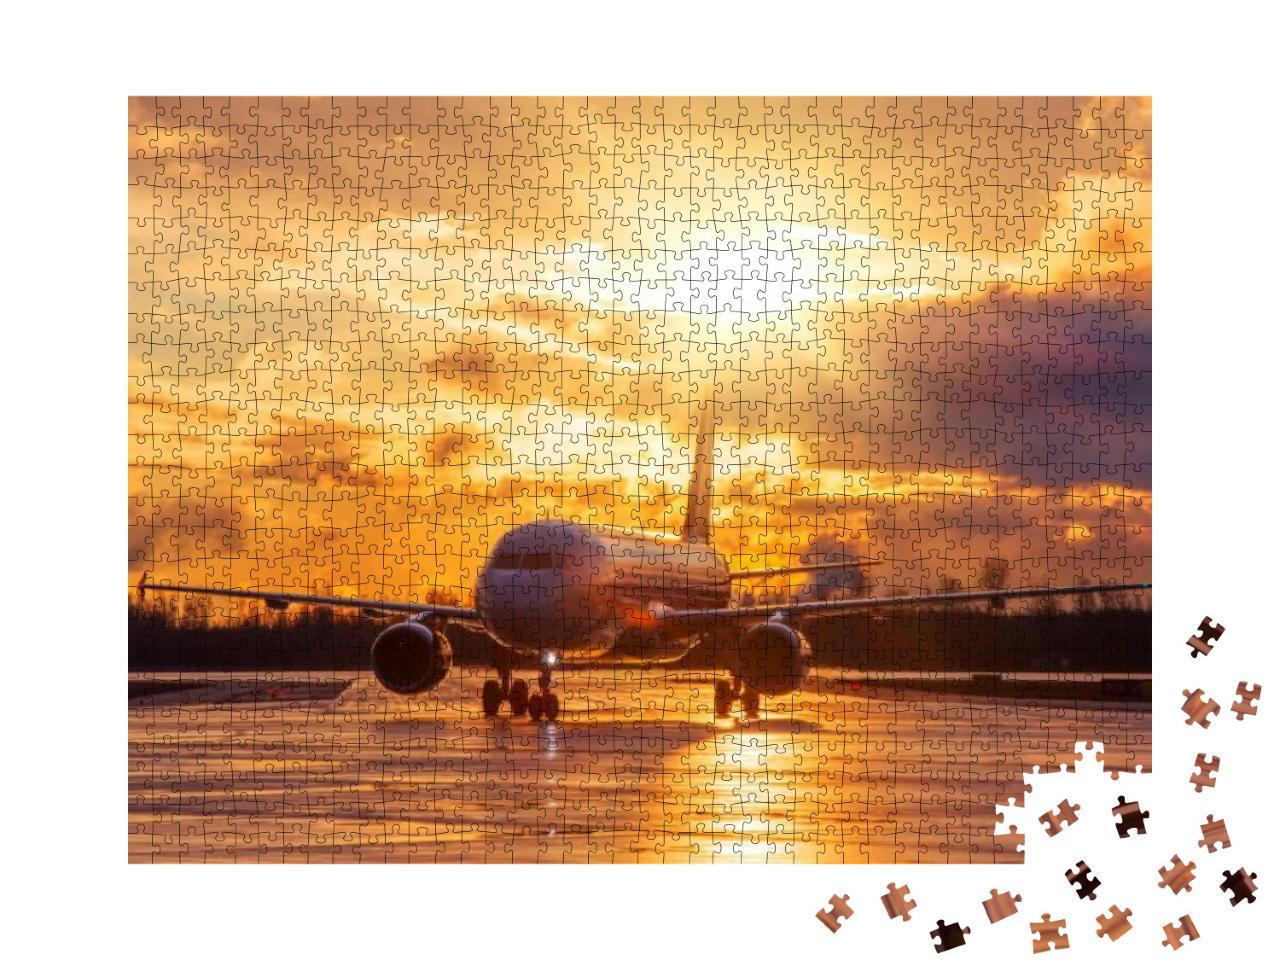 Airplane on Airport Runway Under Sunset View Dramatic Sky... Jigsaw Puzzle with 1000 pieces